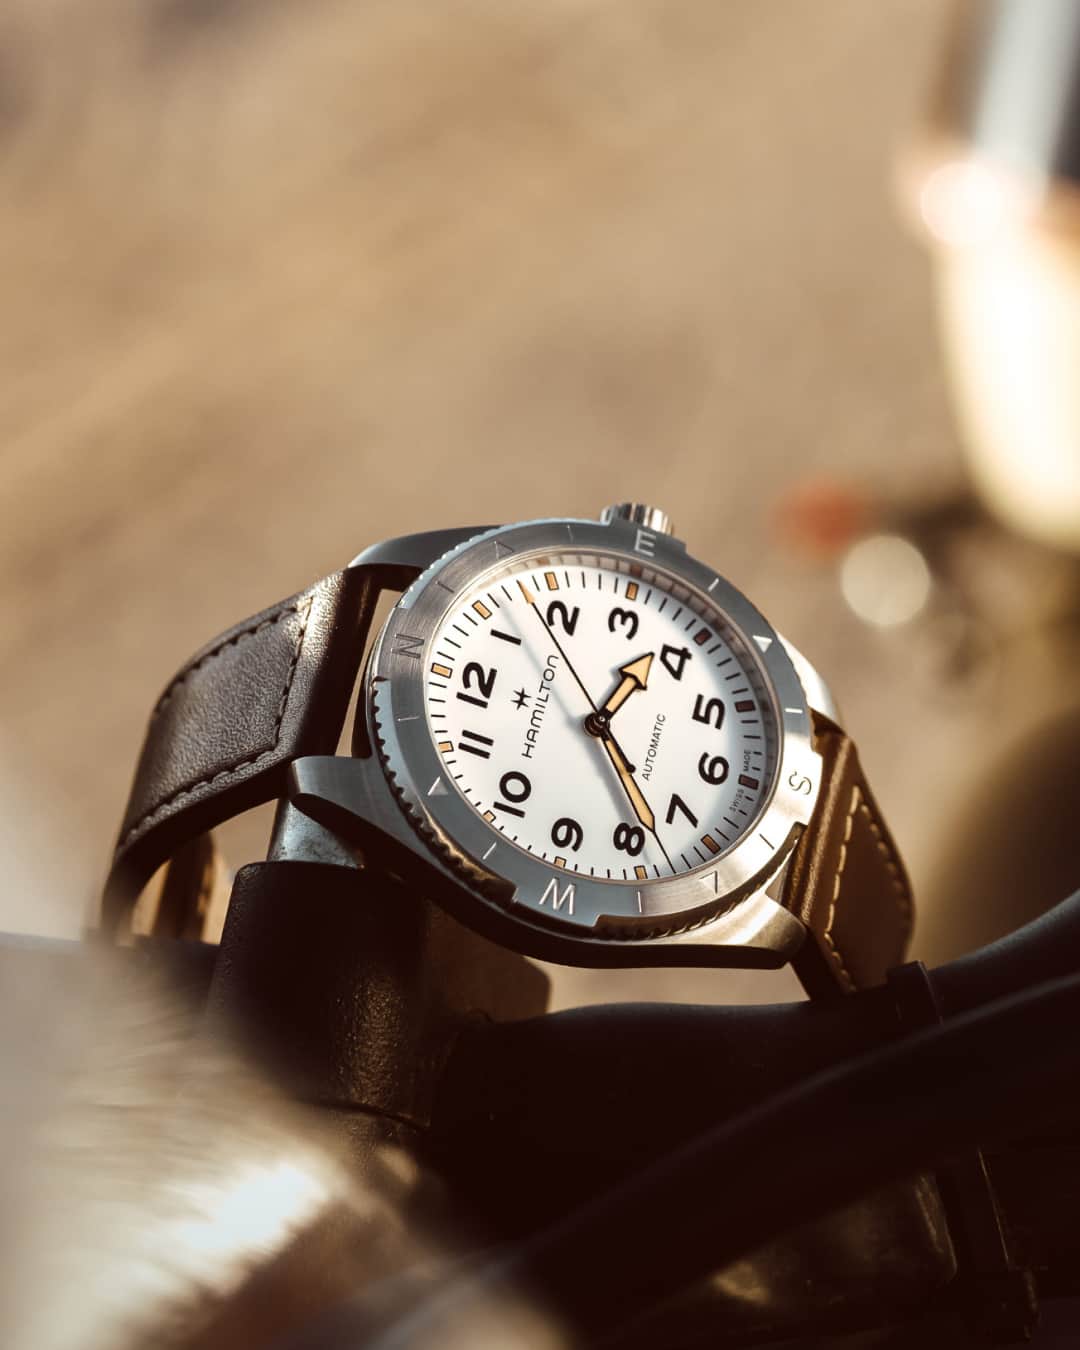 Hamilton Watchのインスタグラム：「Wherever the road leads, precise timing is essential. With its minimalist textured dial and Super-LumiNova® coating, the Khaki Field Expedition lets you grasp time instantly, as you venture through vast sands and chase the horizon.  #hamiltonwatch #stepoutside #expedition #new #adventureawaits」